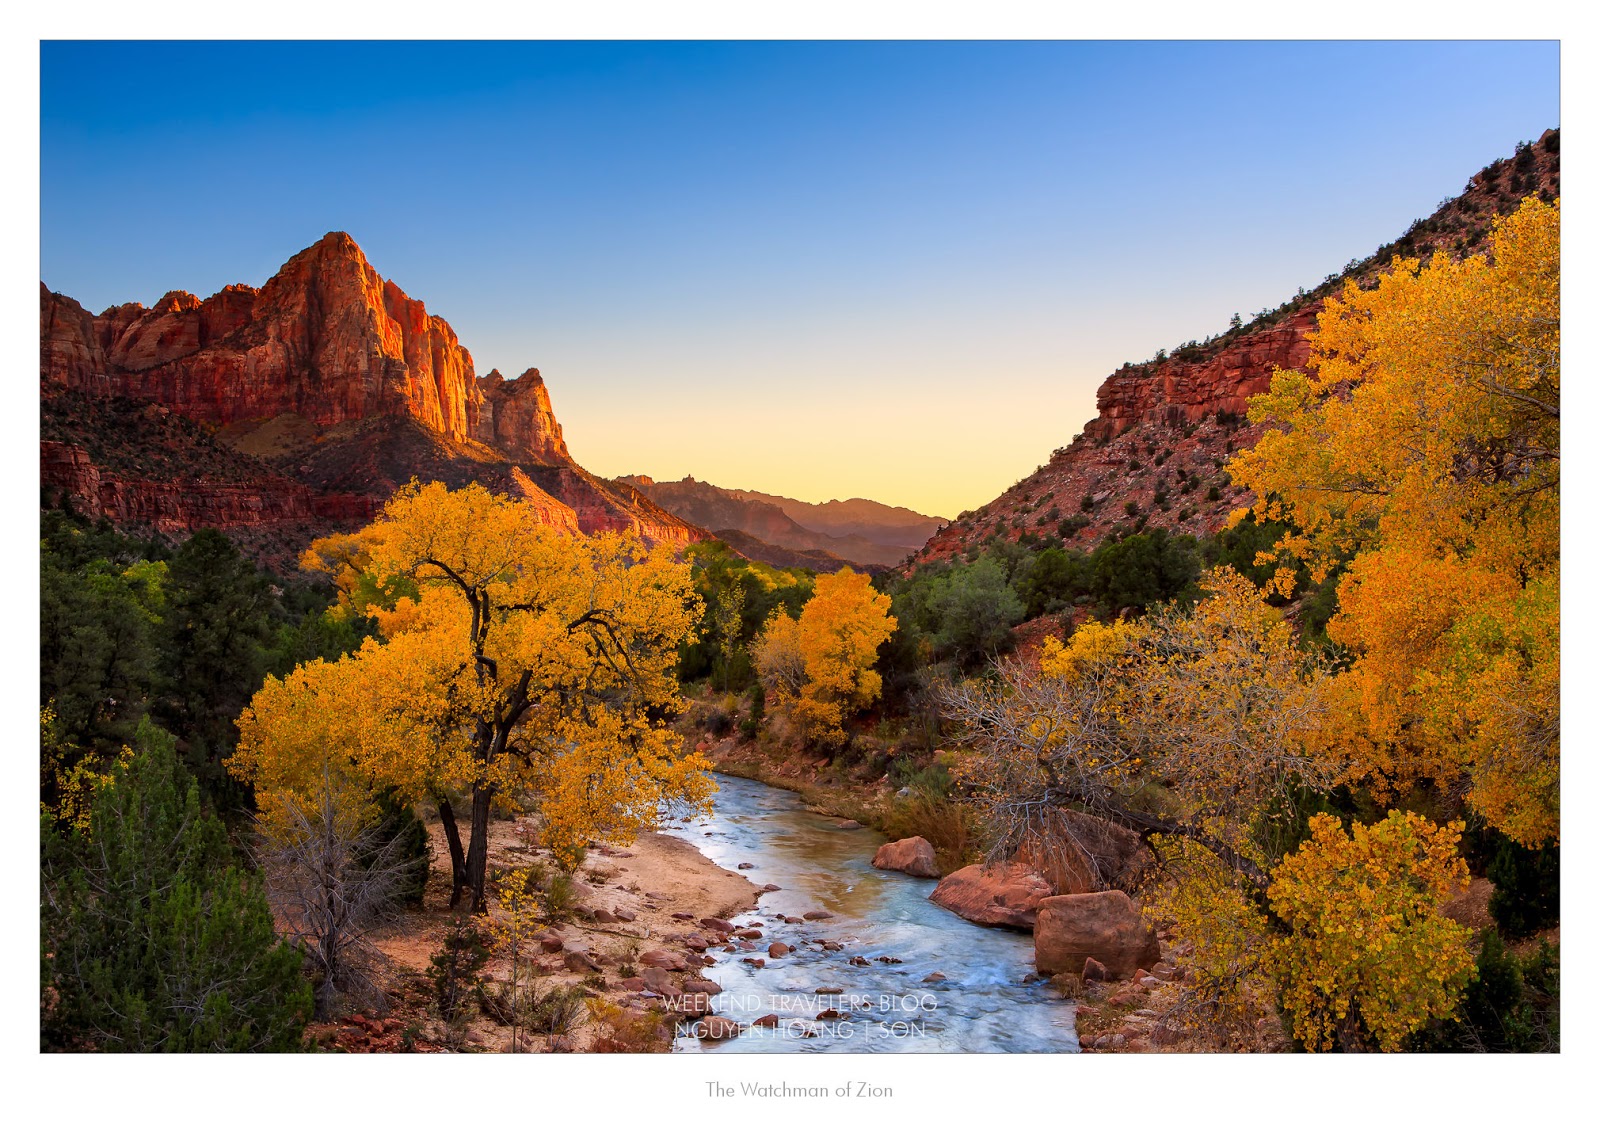 Sunset at the Watchman - Zion National Park - Virgin River